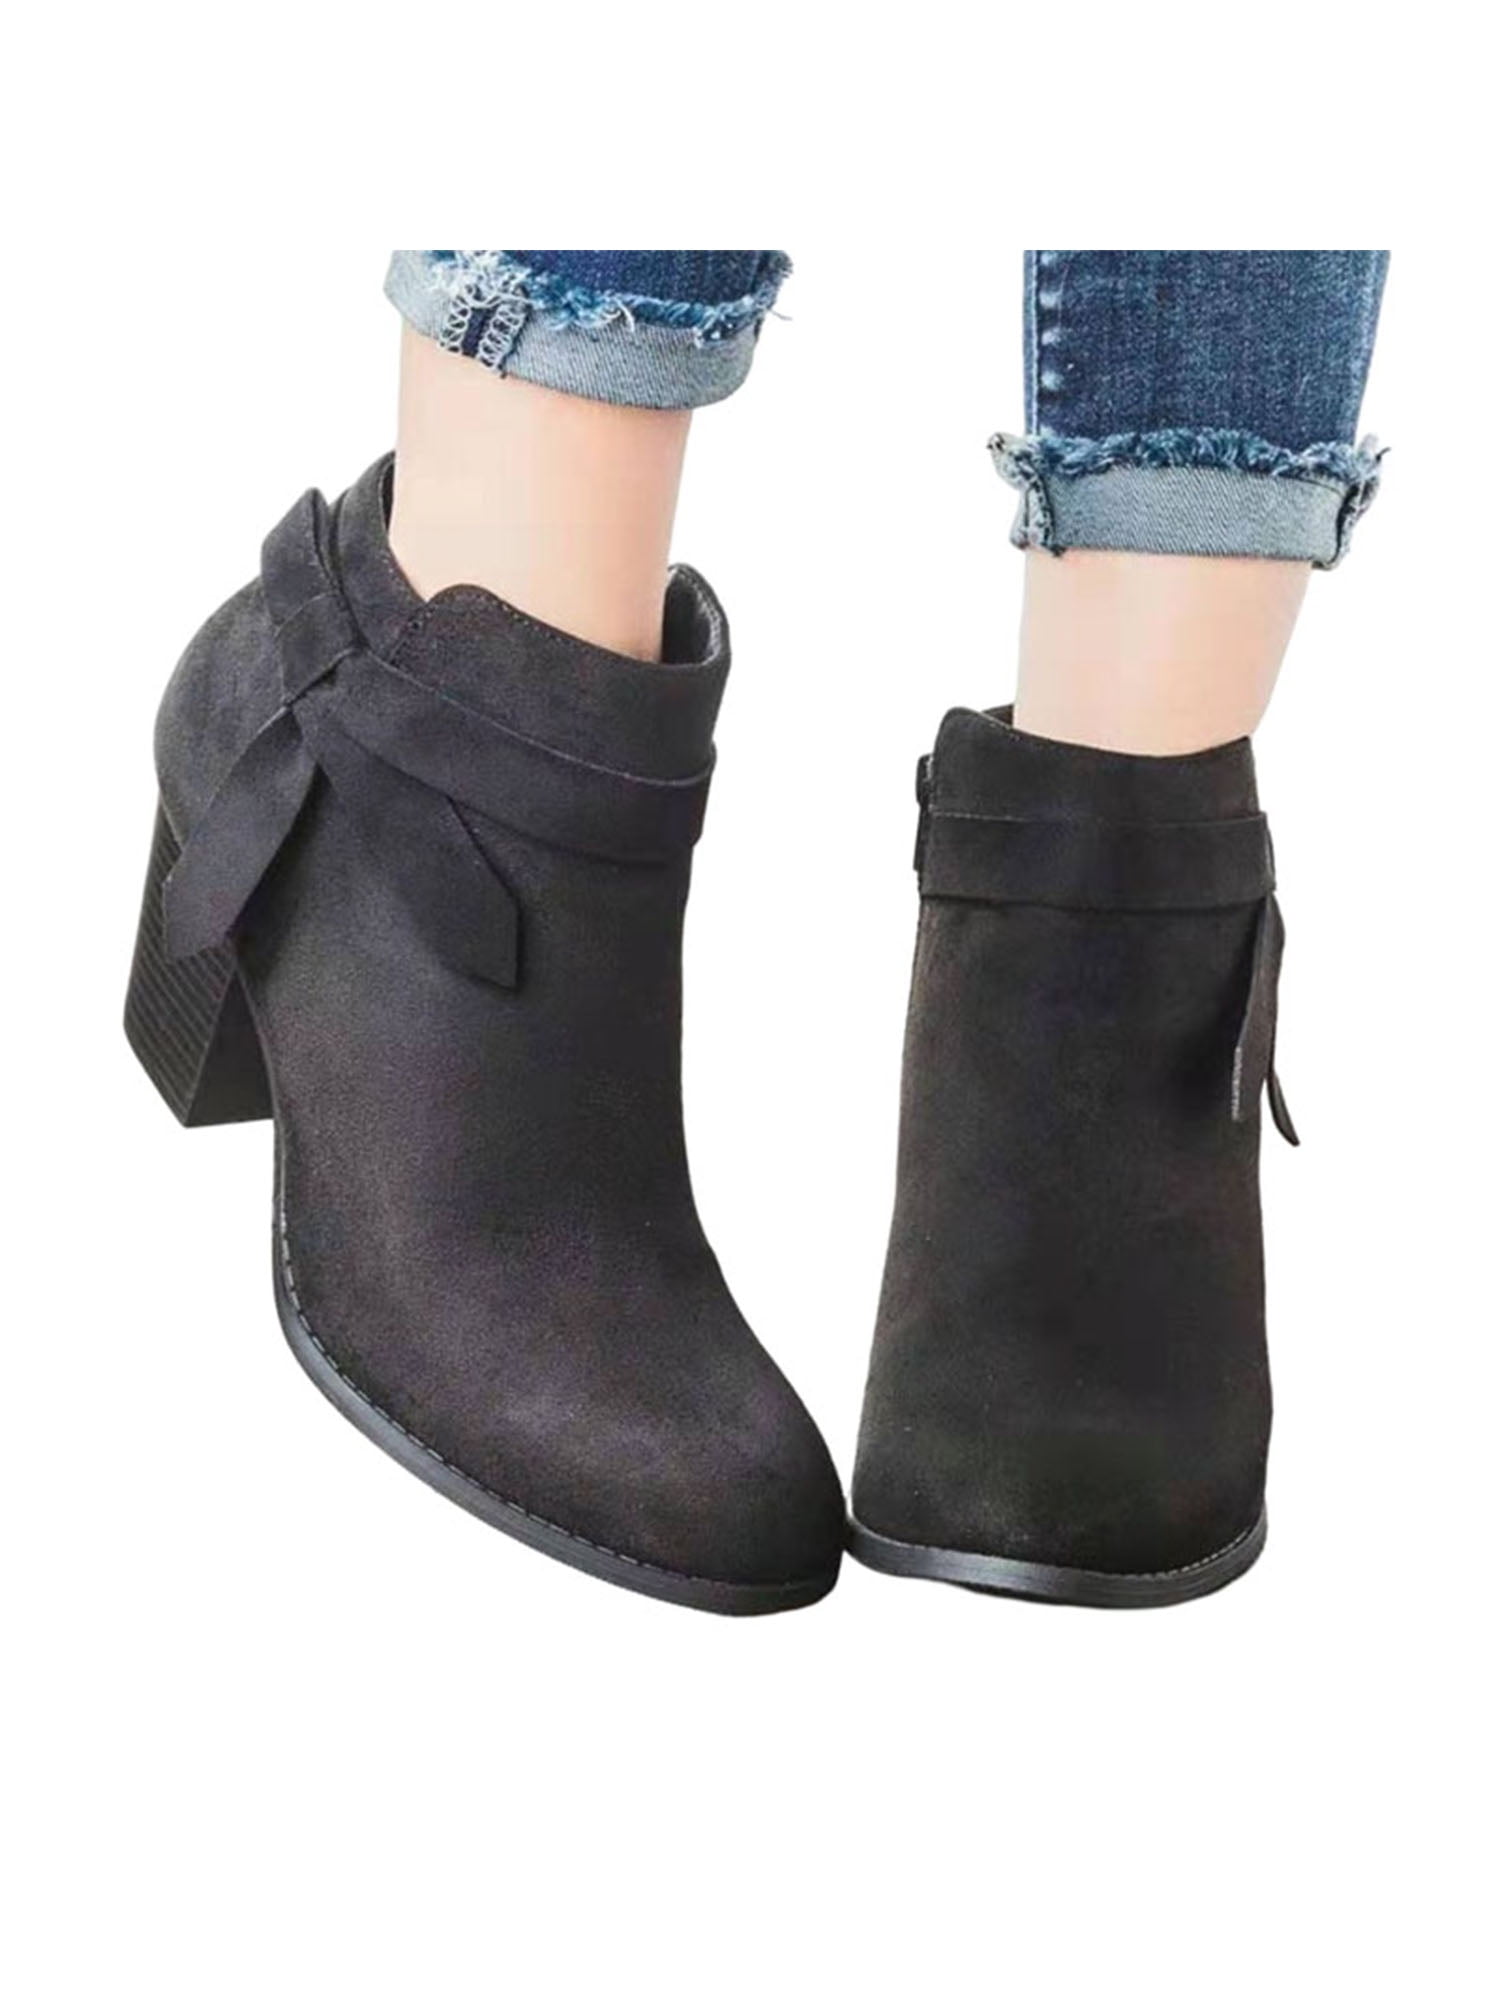 Womens Winter Ankle Boots Slip On Chelsea Booties Casual Low Block Heel Shoes